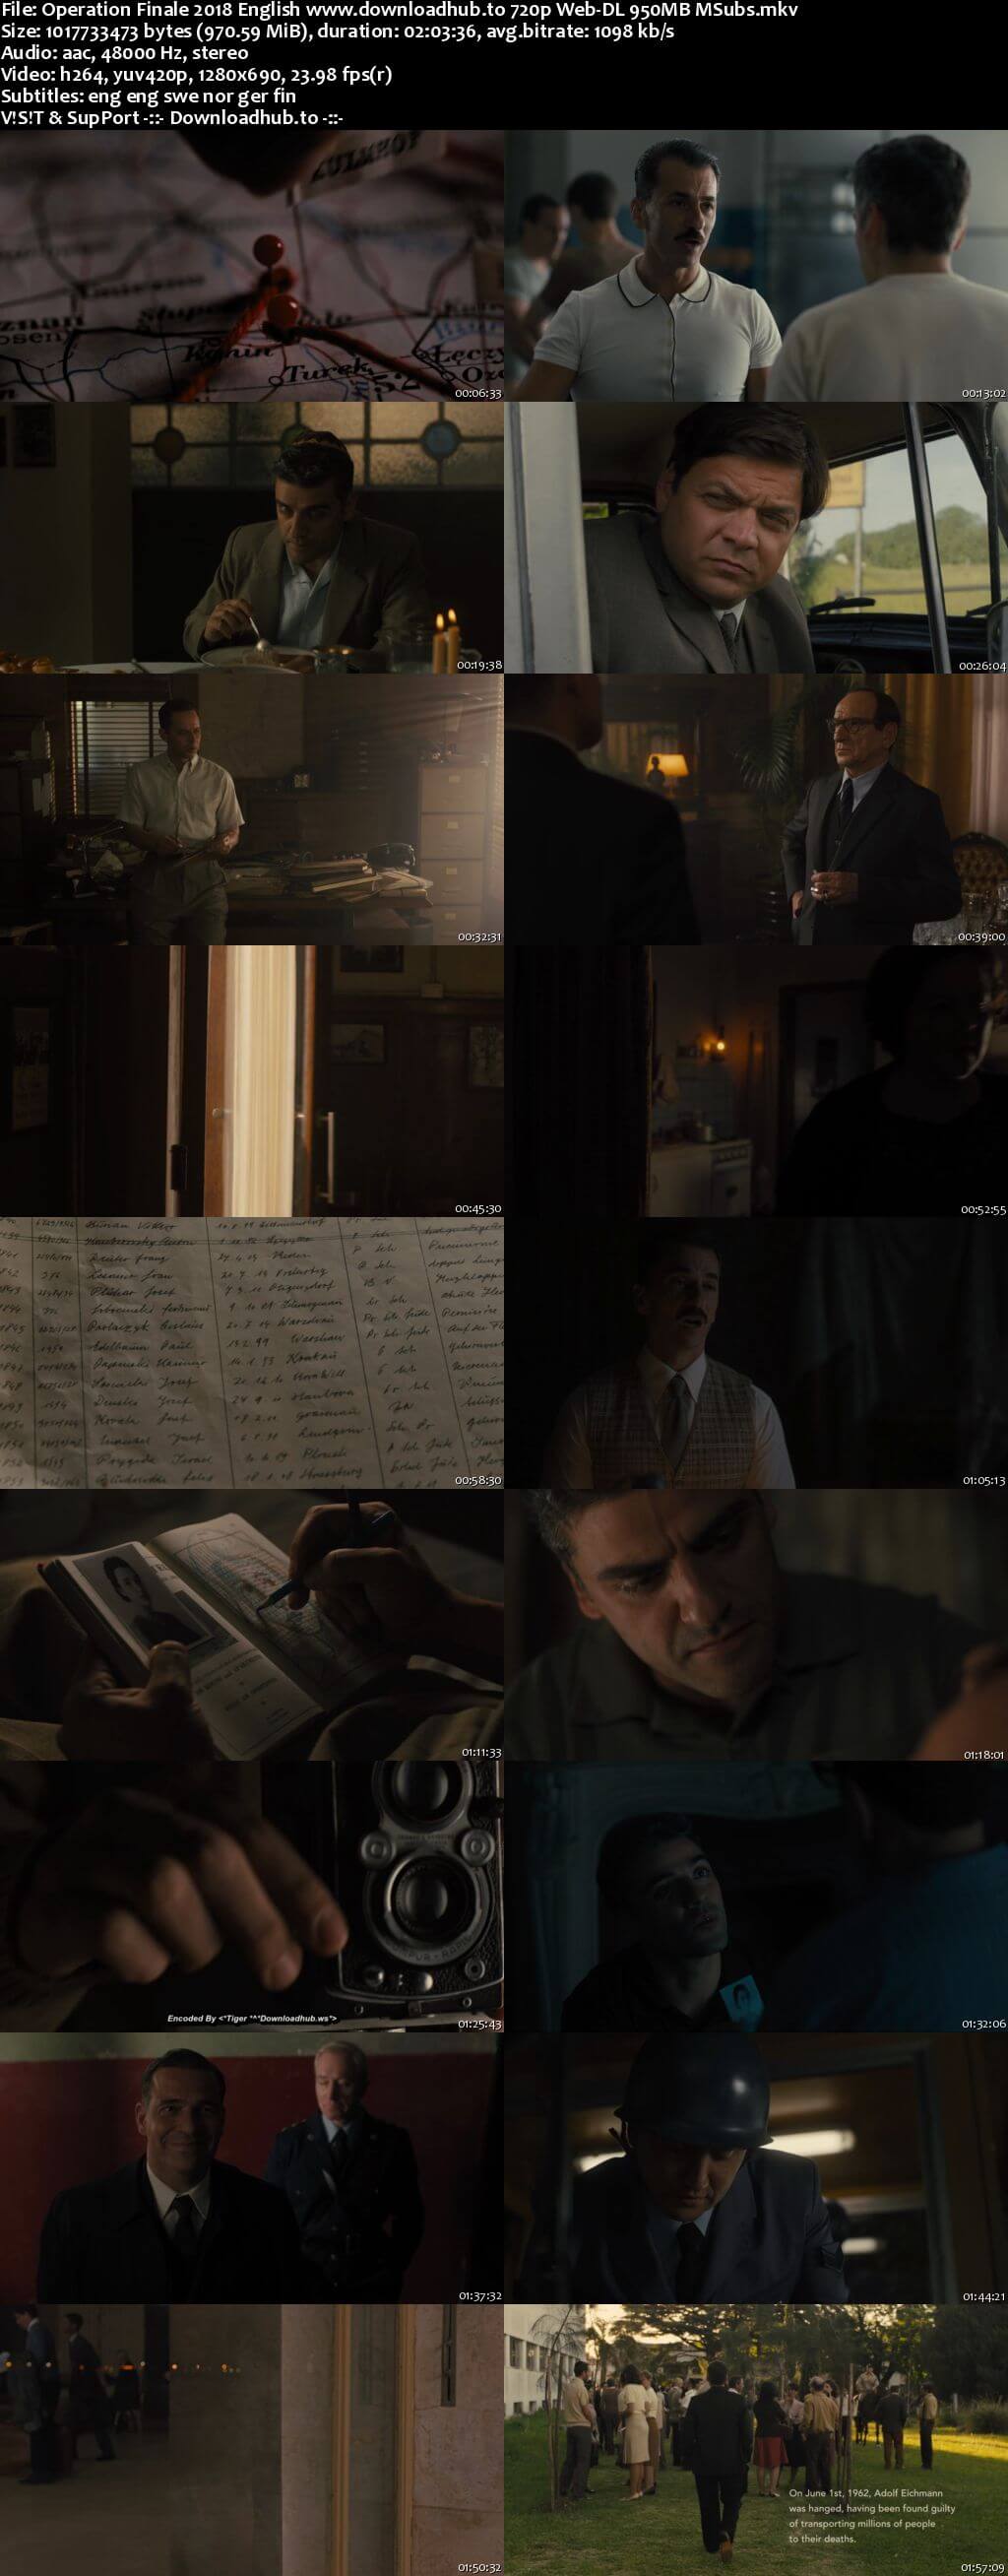 Operation Finale 2018 English 720p Web-DL 950MB MSubs